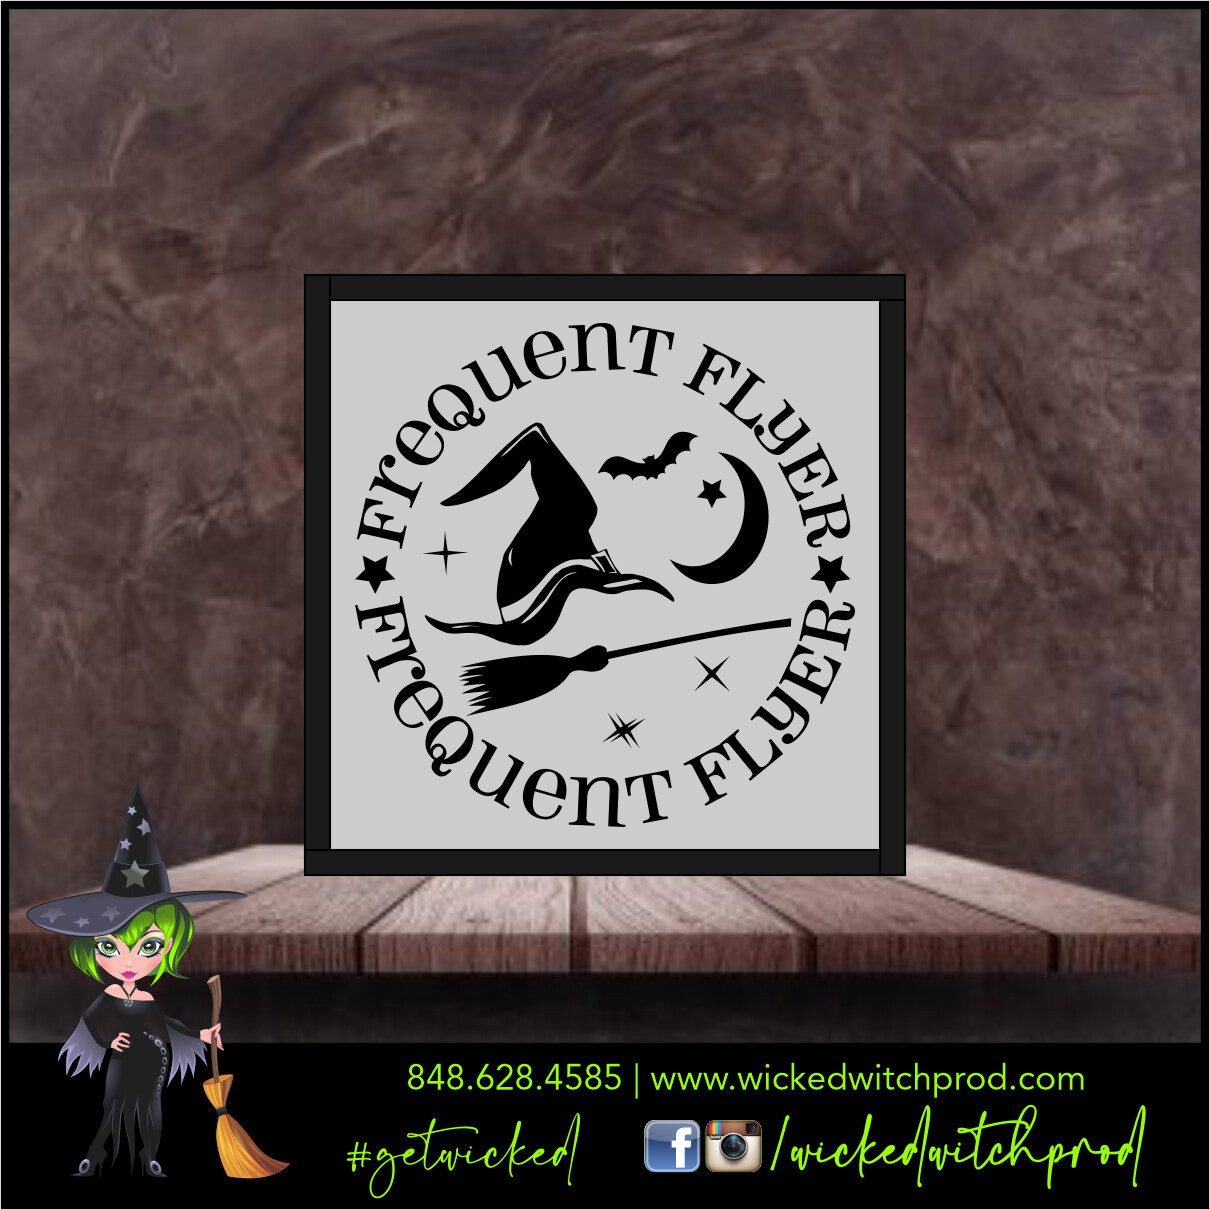 Frequent Flyer - Wicked Farmhouse Sign (8